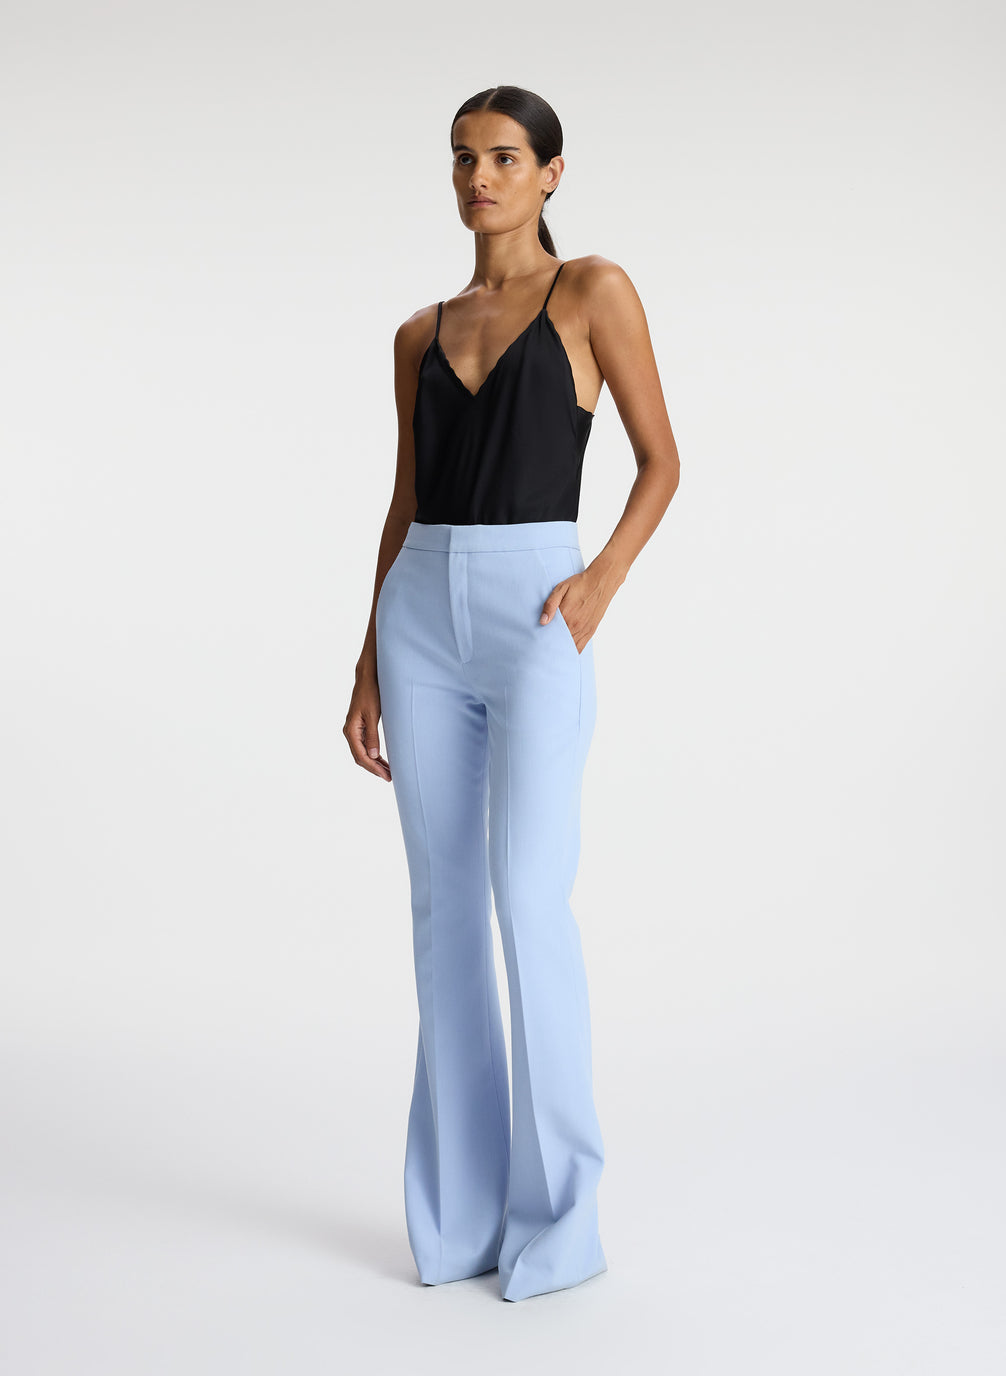 side view of woman wearing black satin camisole with light blue pants